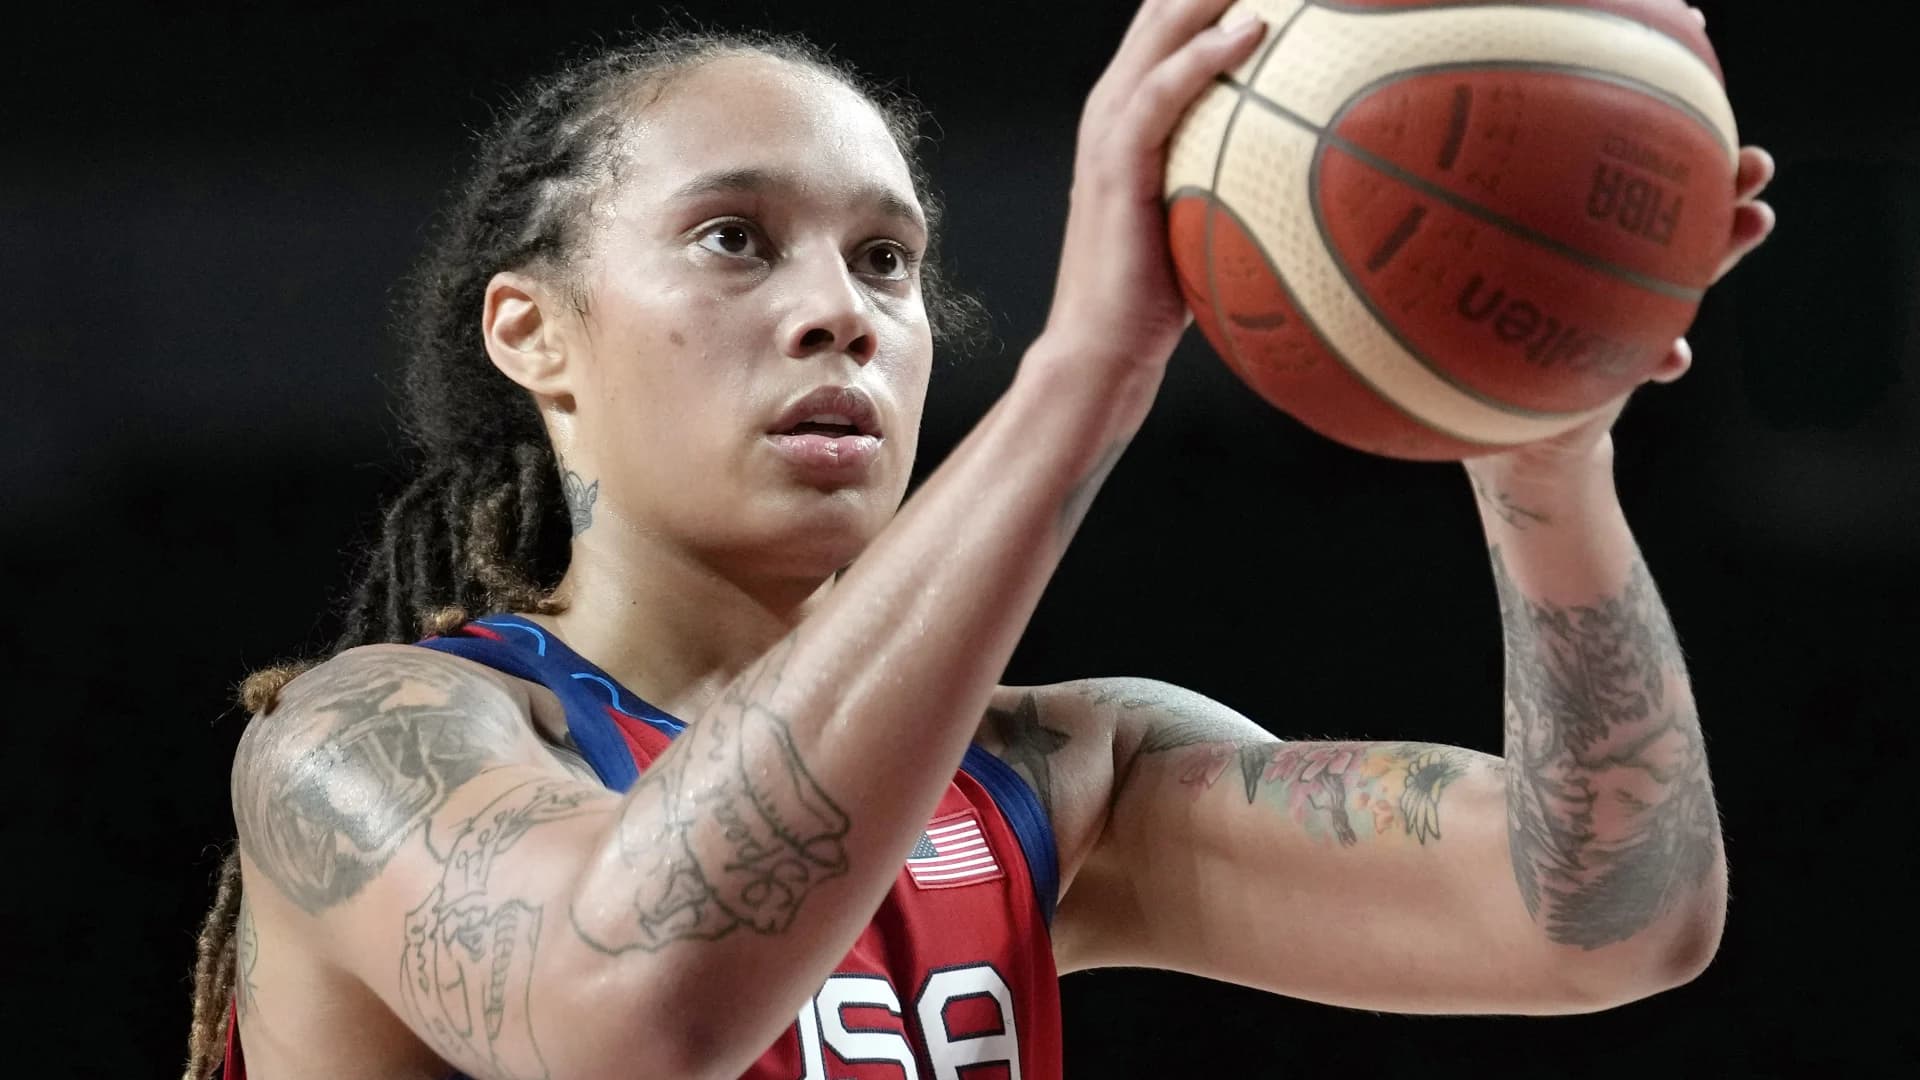 Report: Russian court extends Griner's arrest until May 19